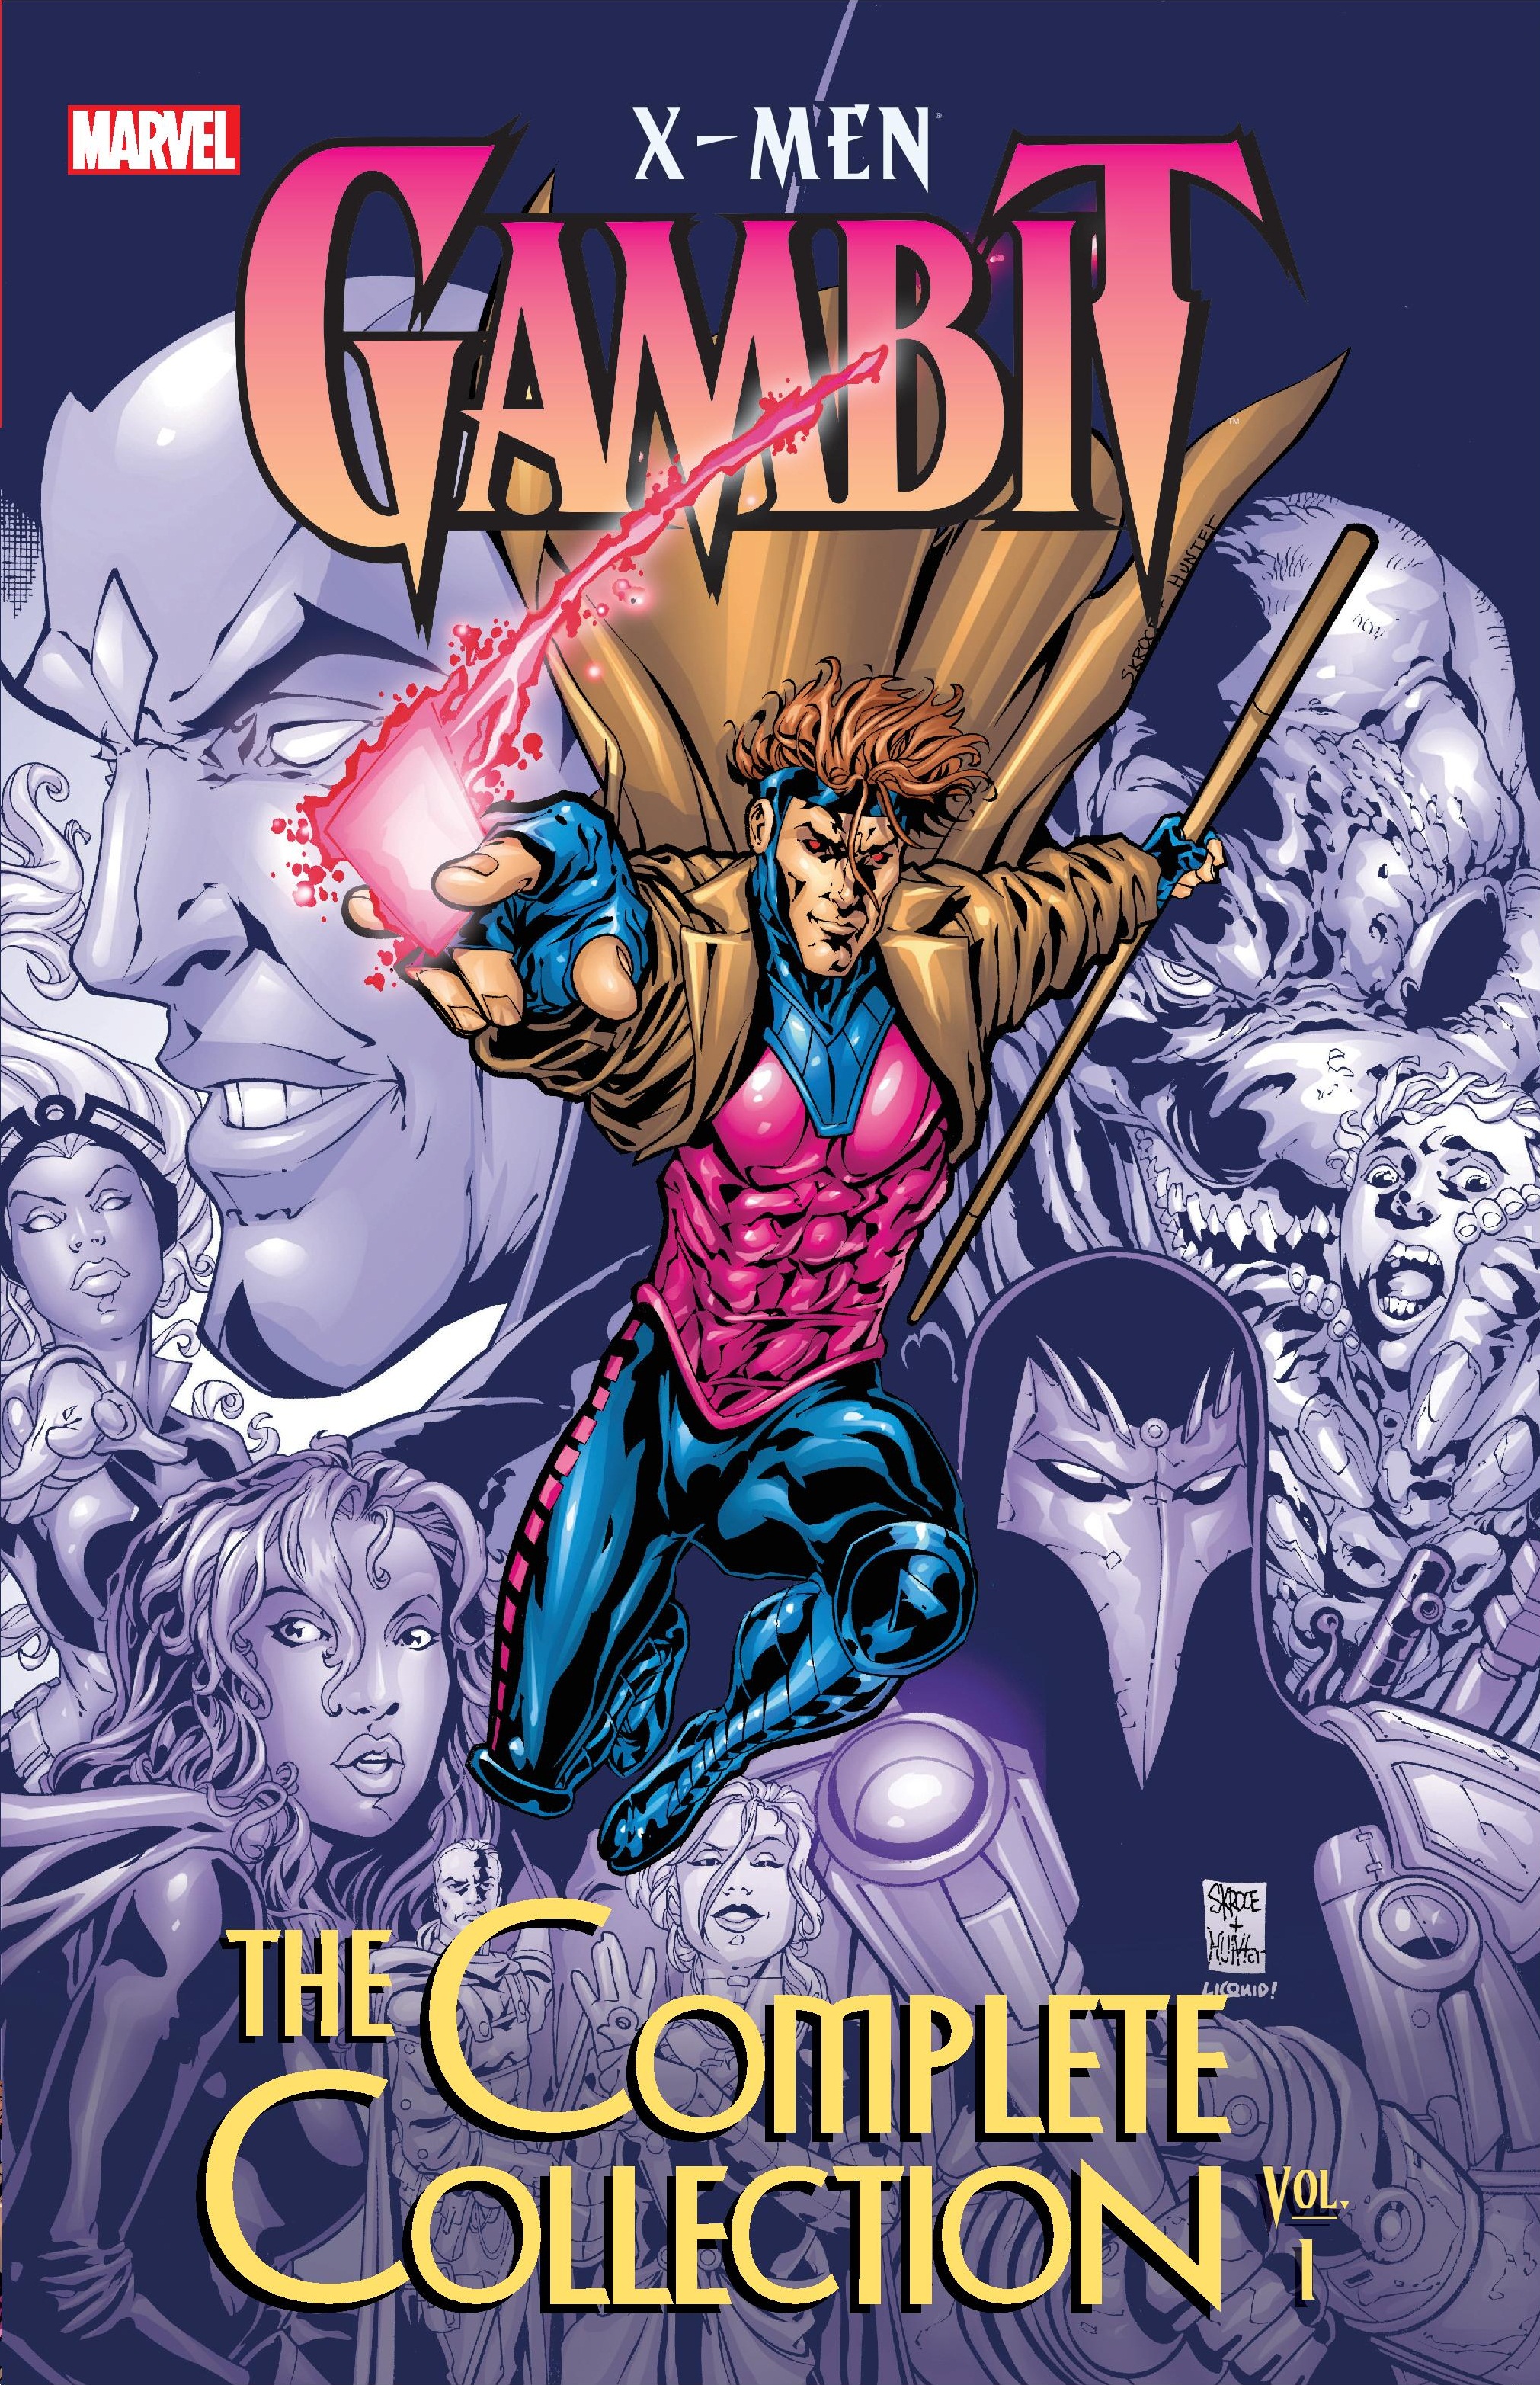 X-Men: Gambit - The Complete Collection Vol. 1 (Trade Paperback)